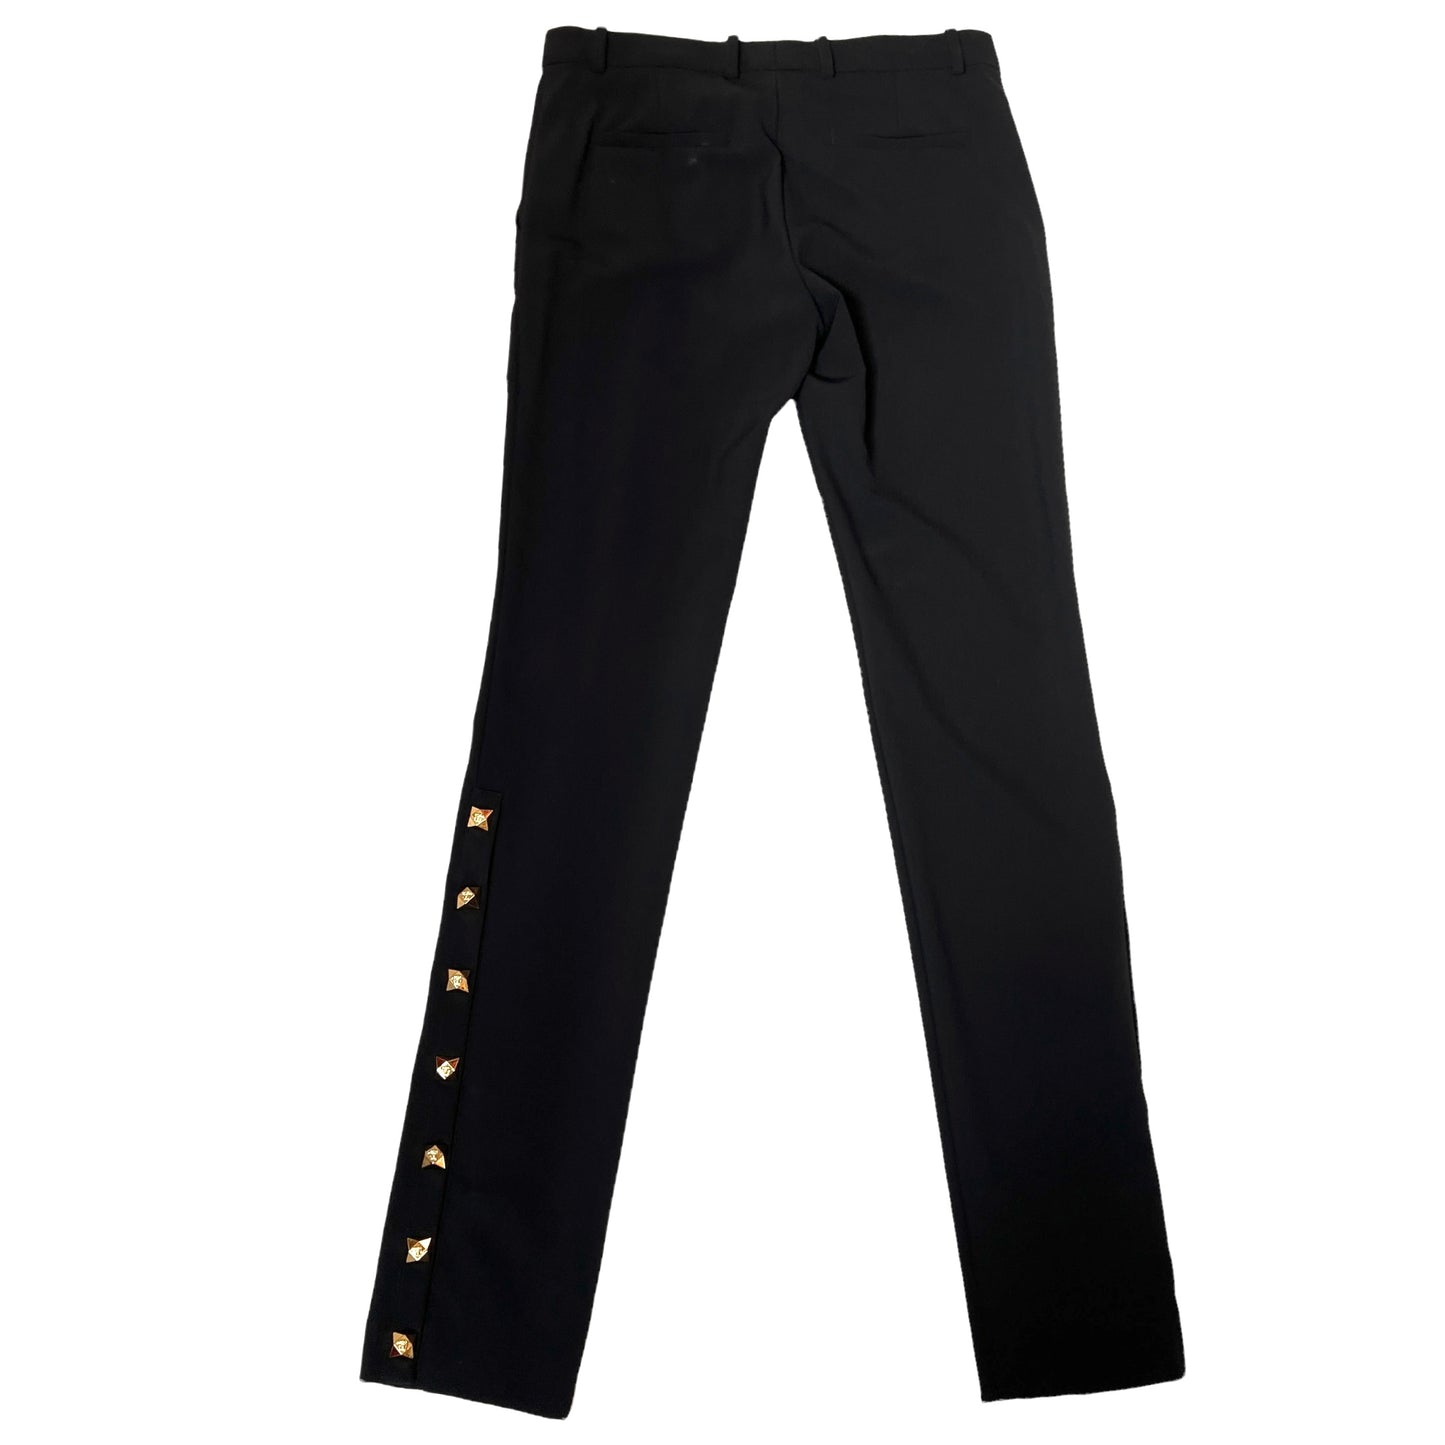 Black Pants with Gold Studs - 42